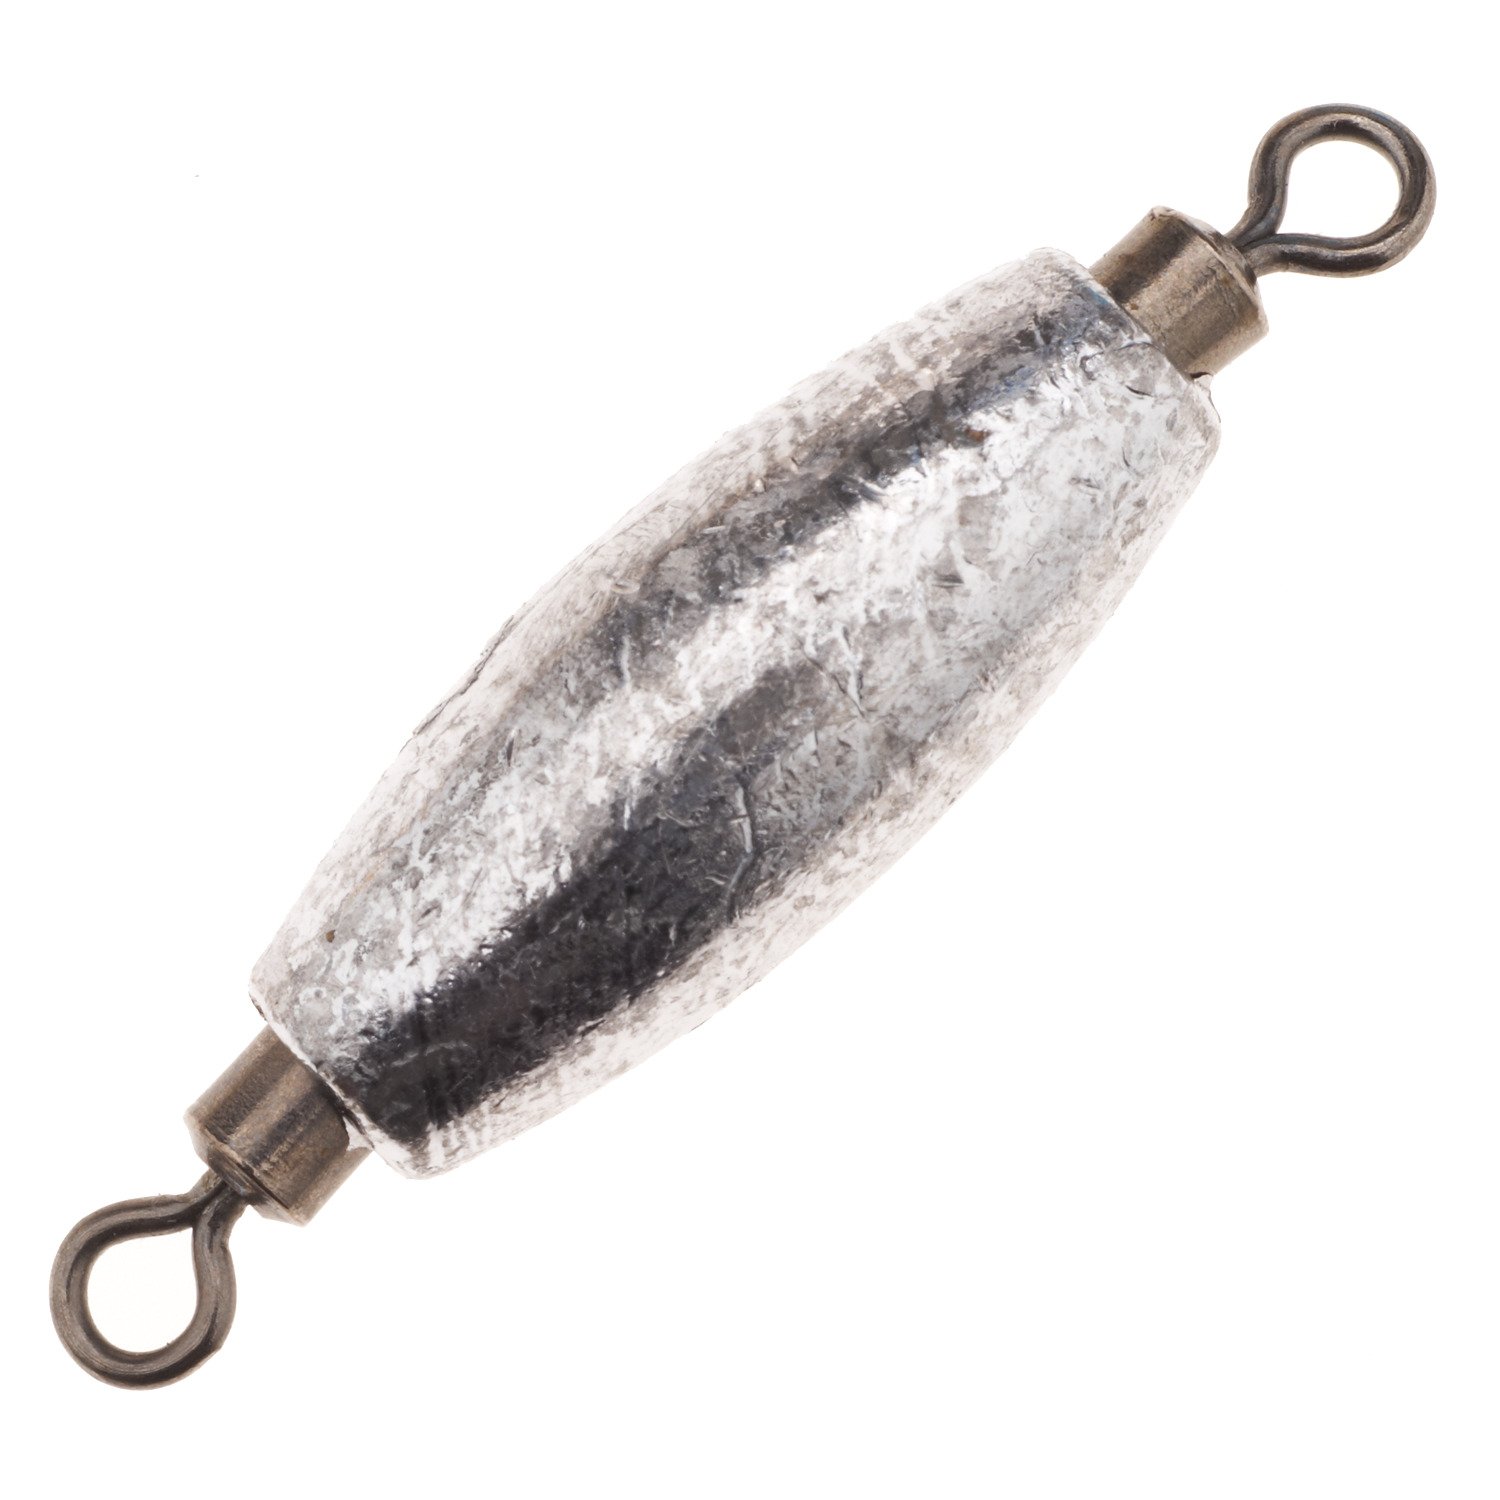 10.5/14/21/28/35/42 g Tungsten Sinkers Fishing Weights Sinkers Tungsten  Fall Line Sinkers For Bass Fishing Tackle Accessories